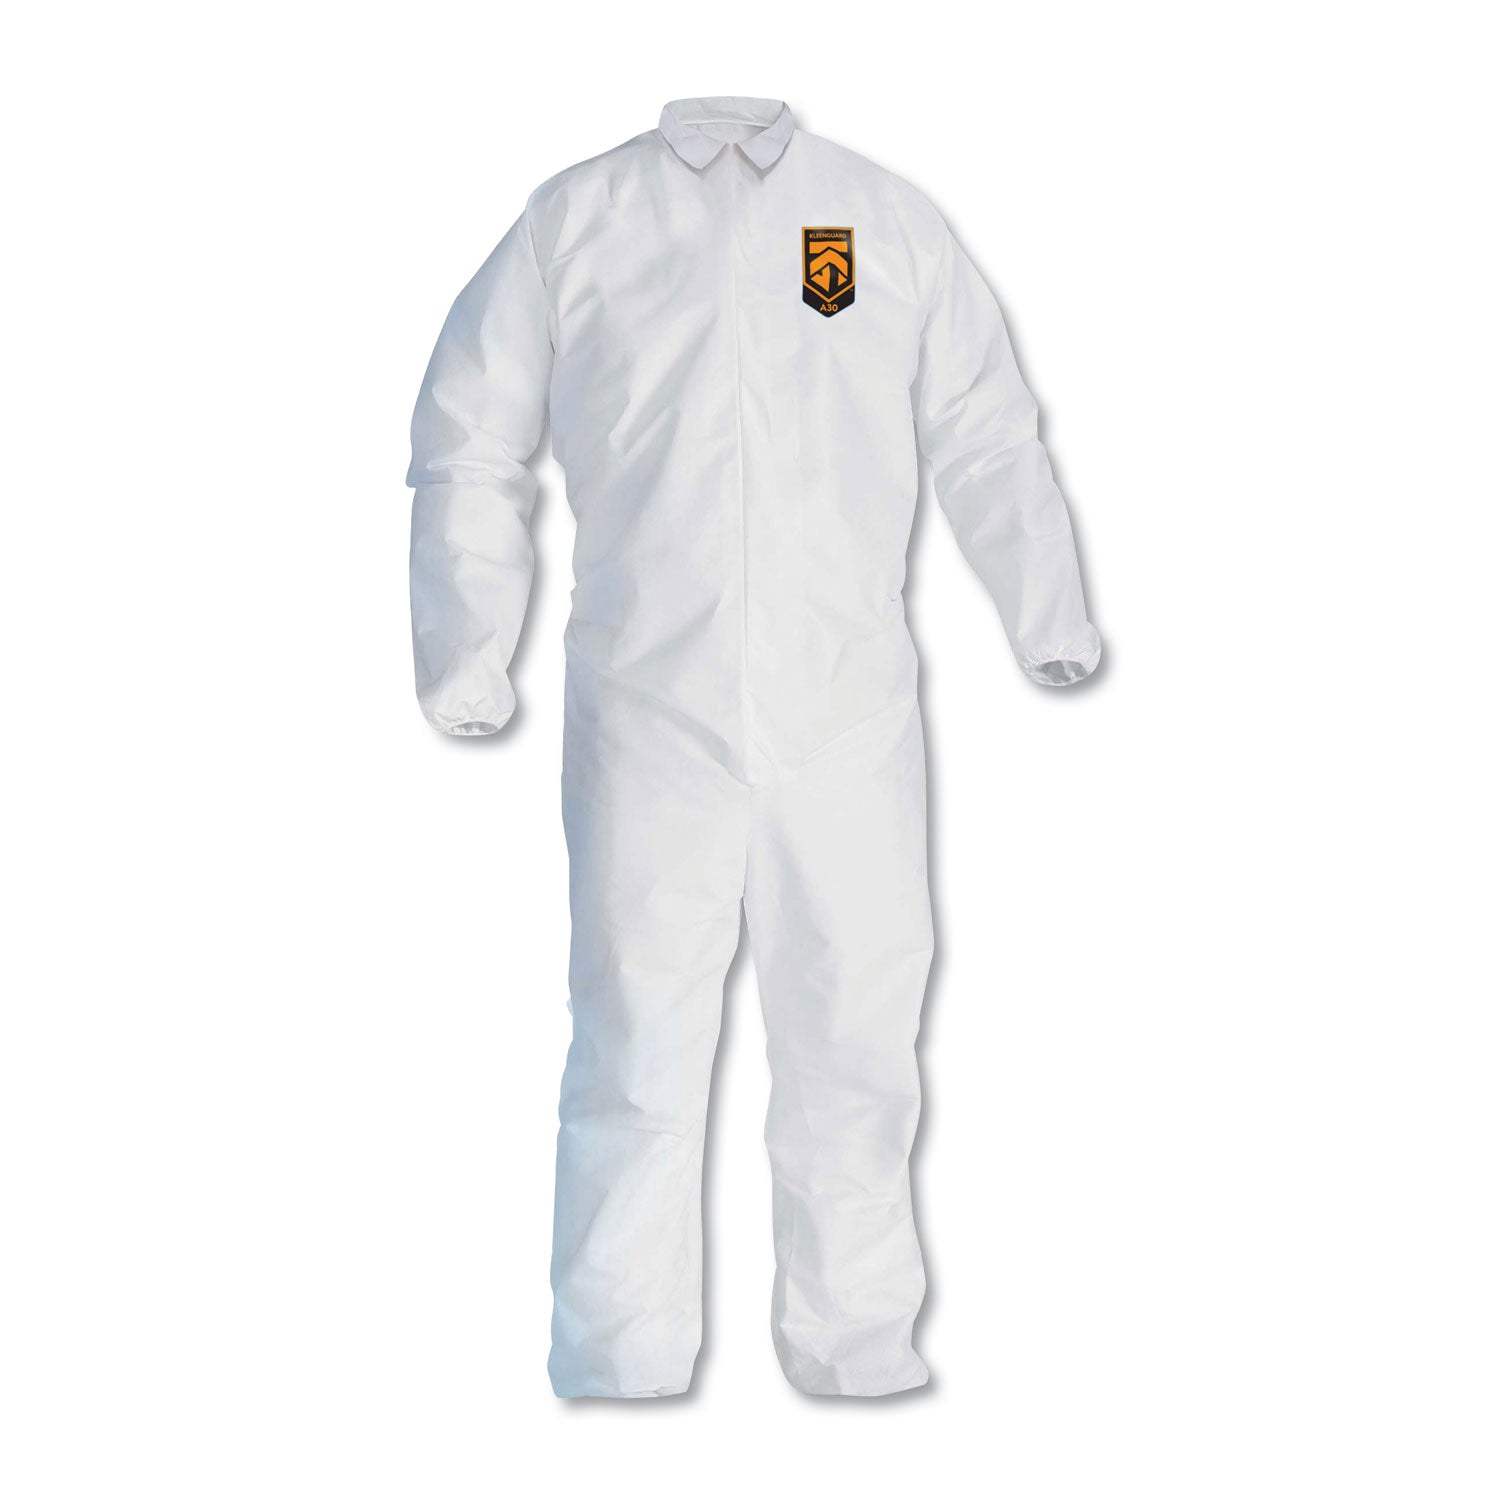 a30-elastic-back-and-cuff-coveralls-2x-large-white-25-carton_kcc46105 - 1